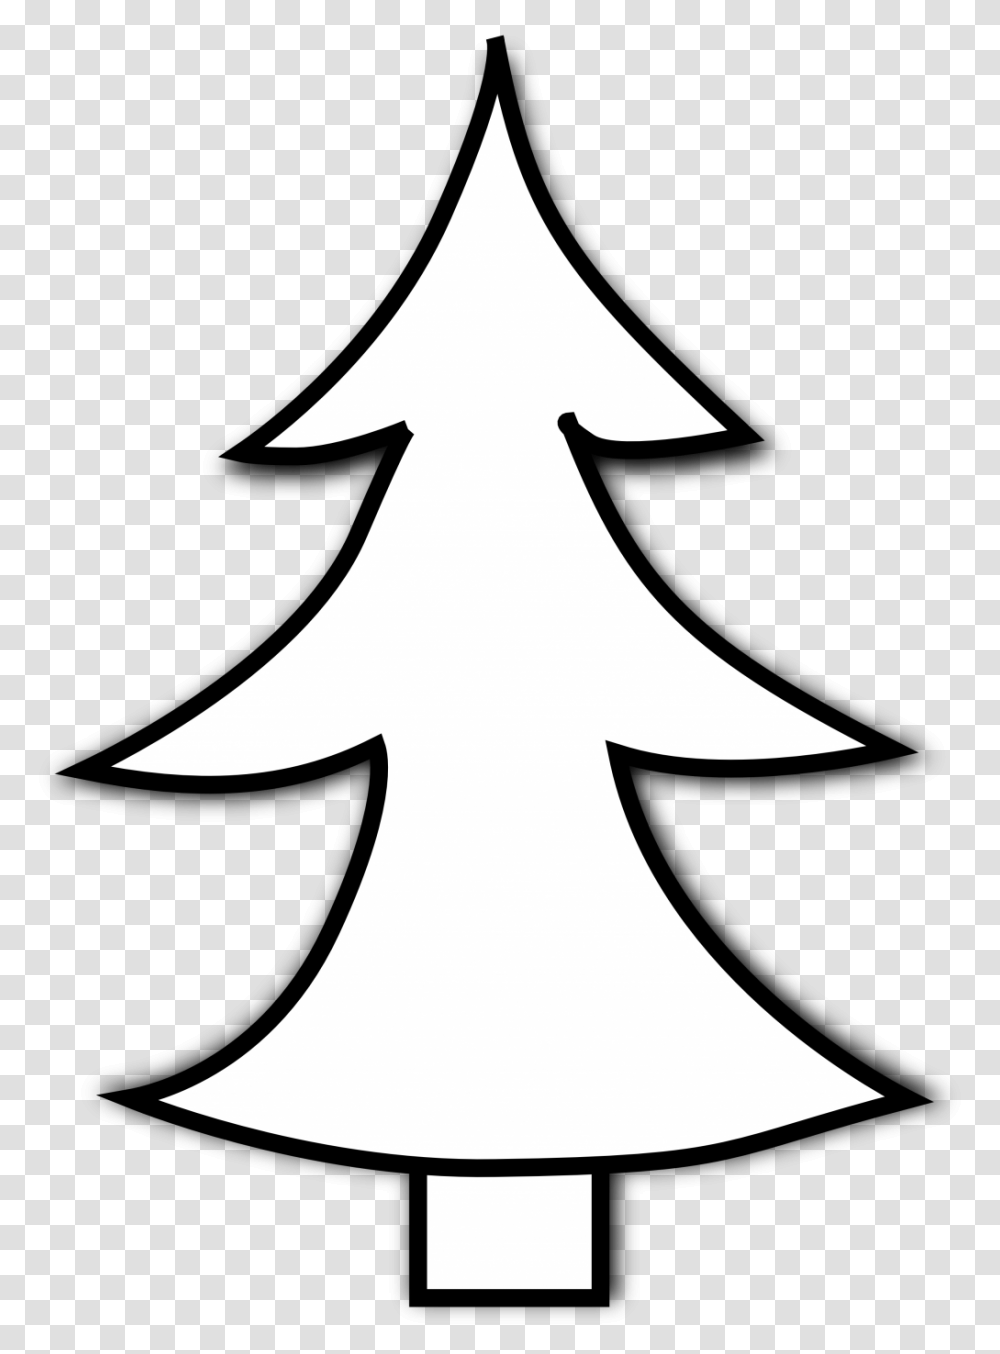 Baby Nursery Exquisite Black And White Christmas Tree Clip Art, Star Symbol, Stencil Transparent Png